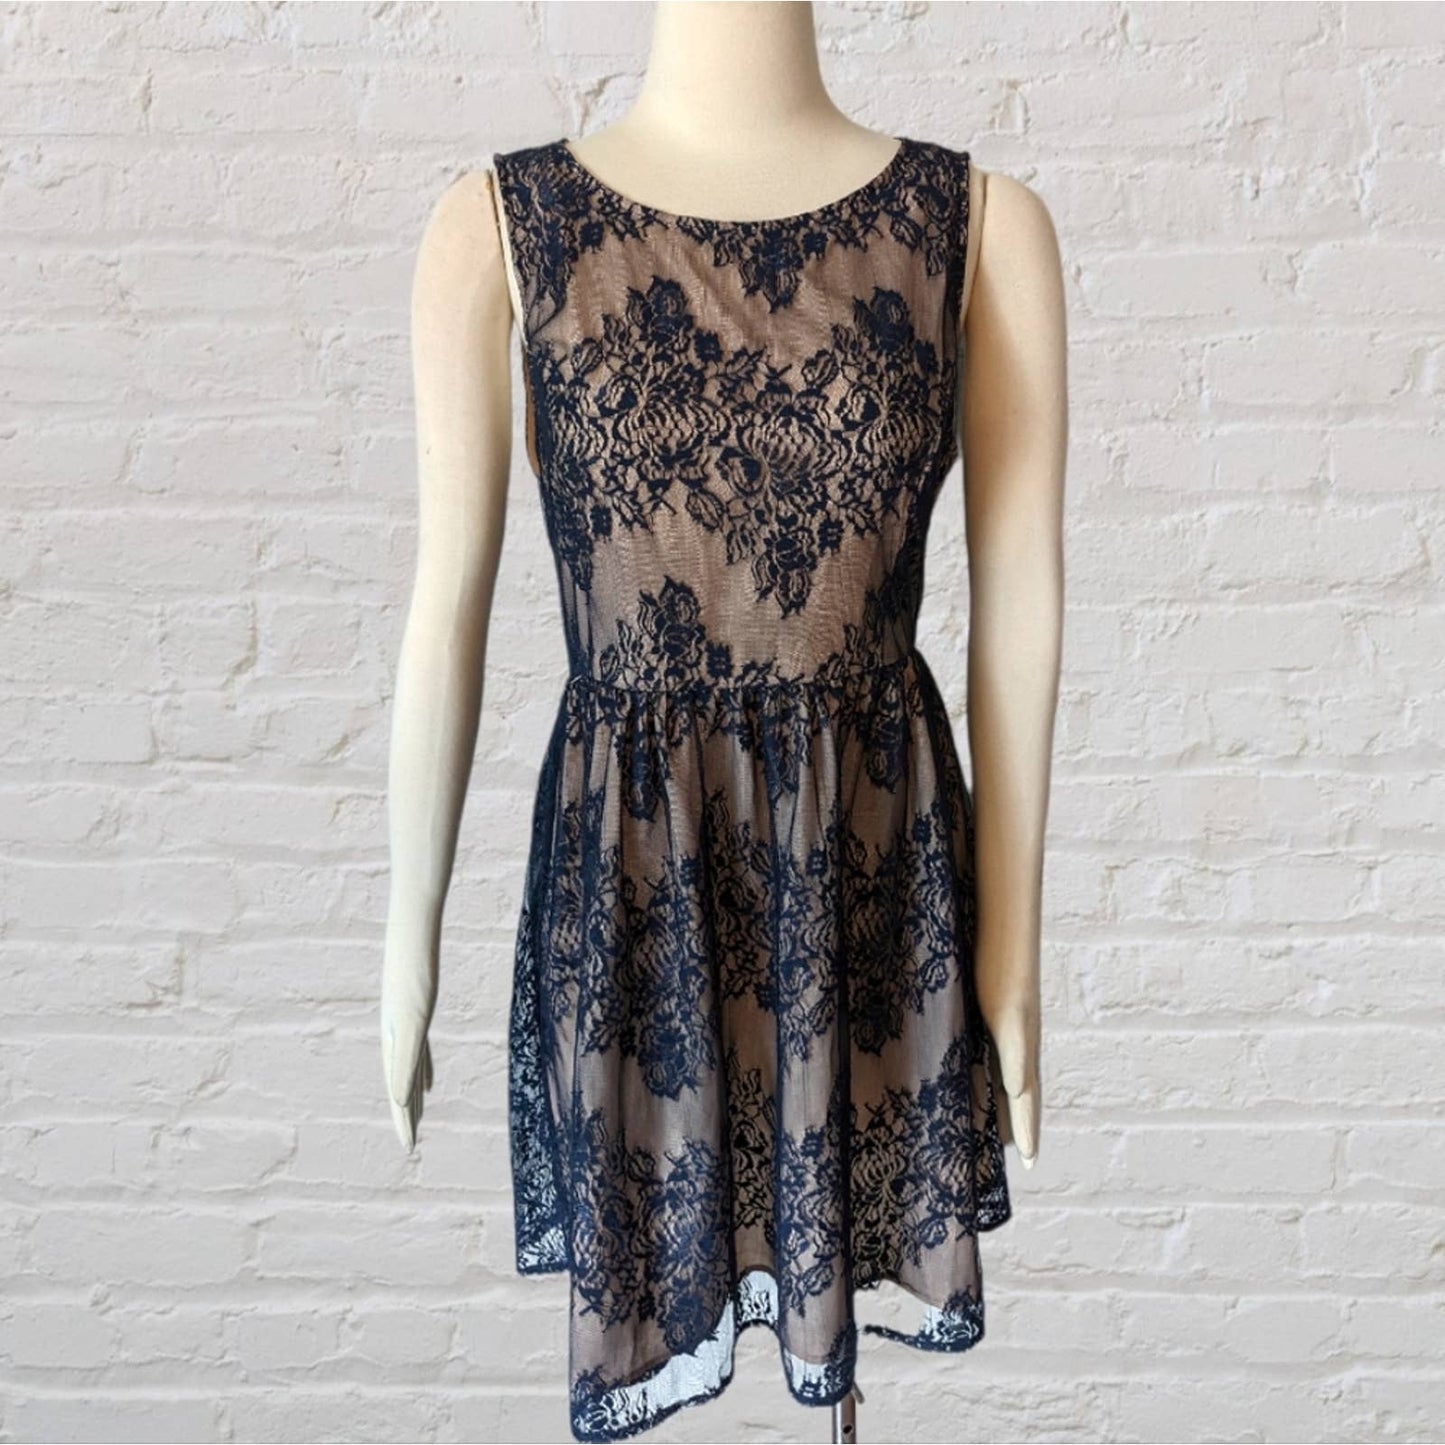 FOREVER 21 Navy Blue Lace Party Dress with Tan Lining Large